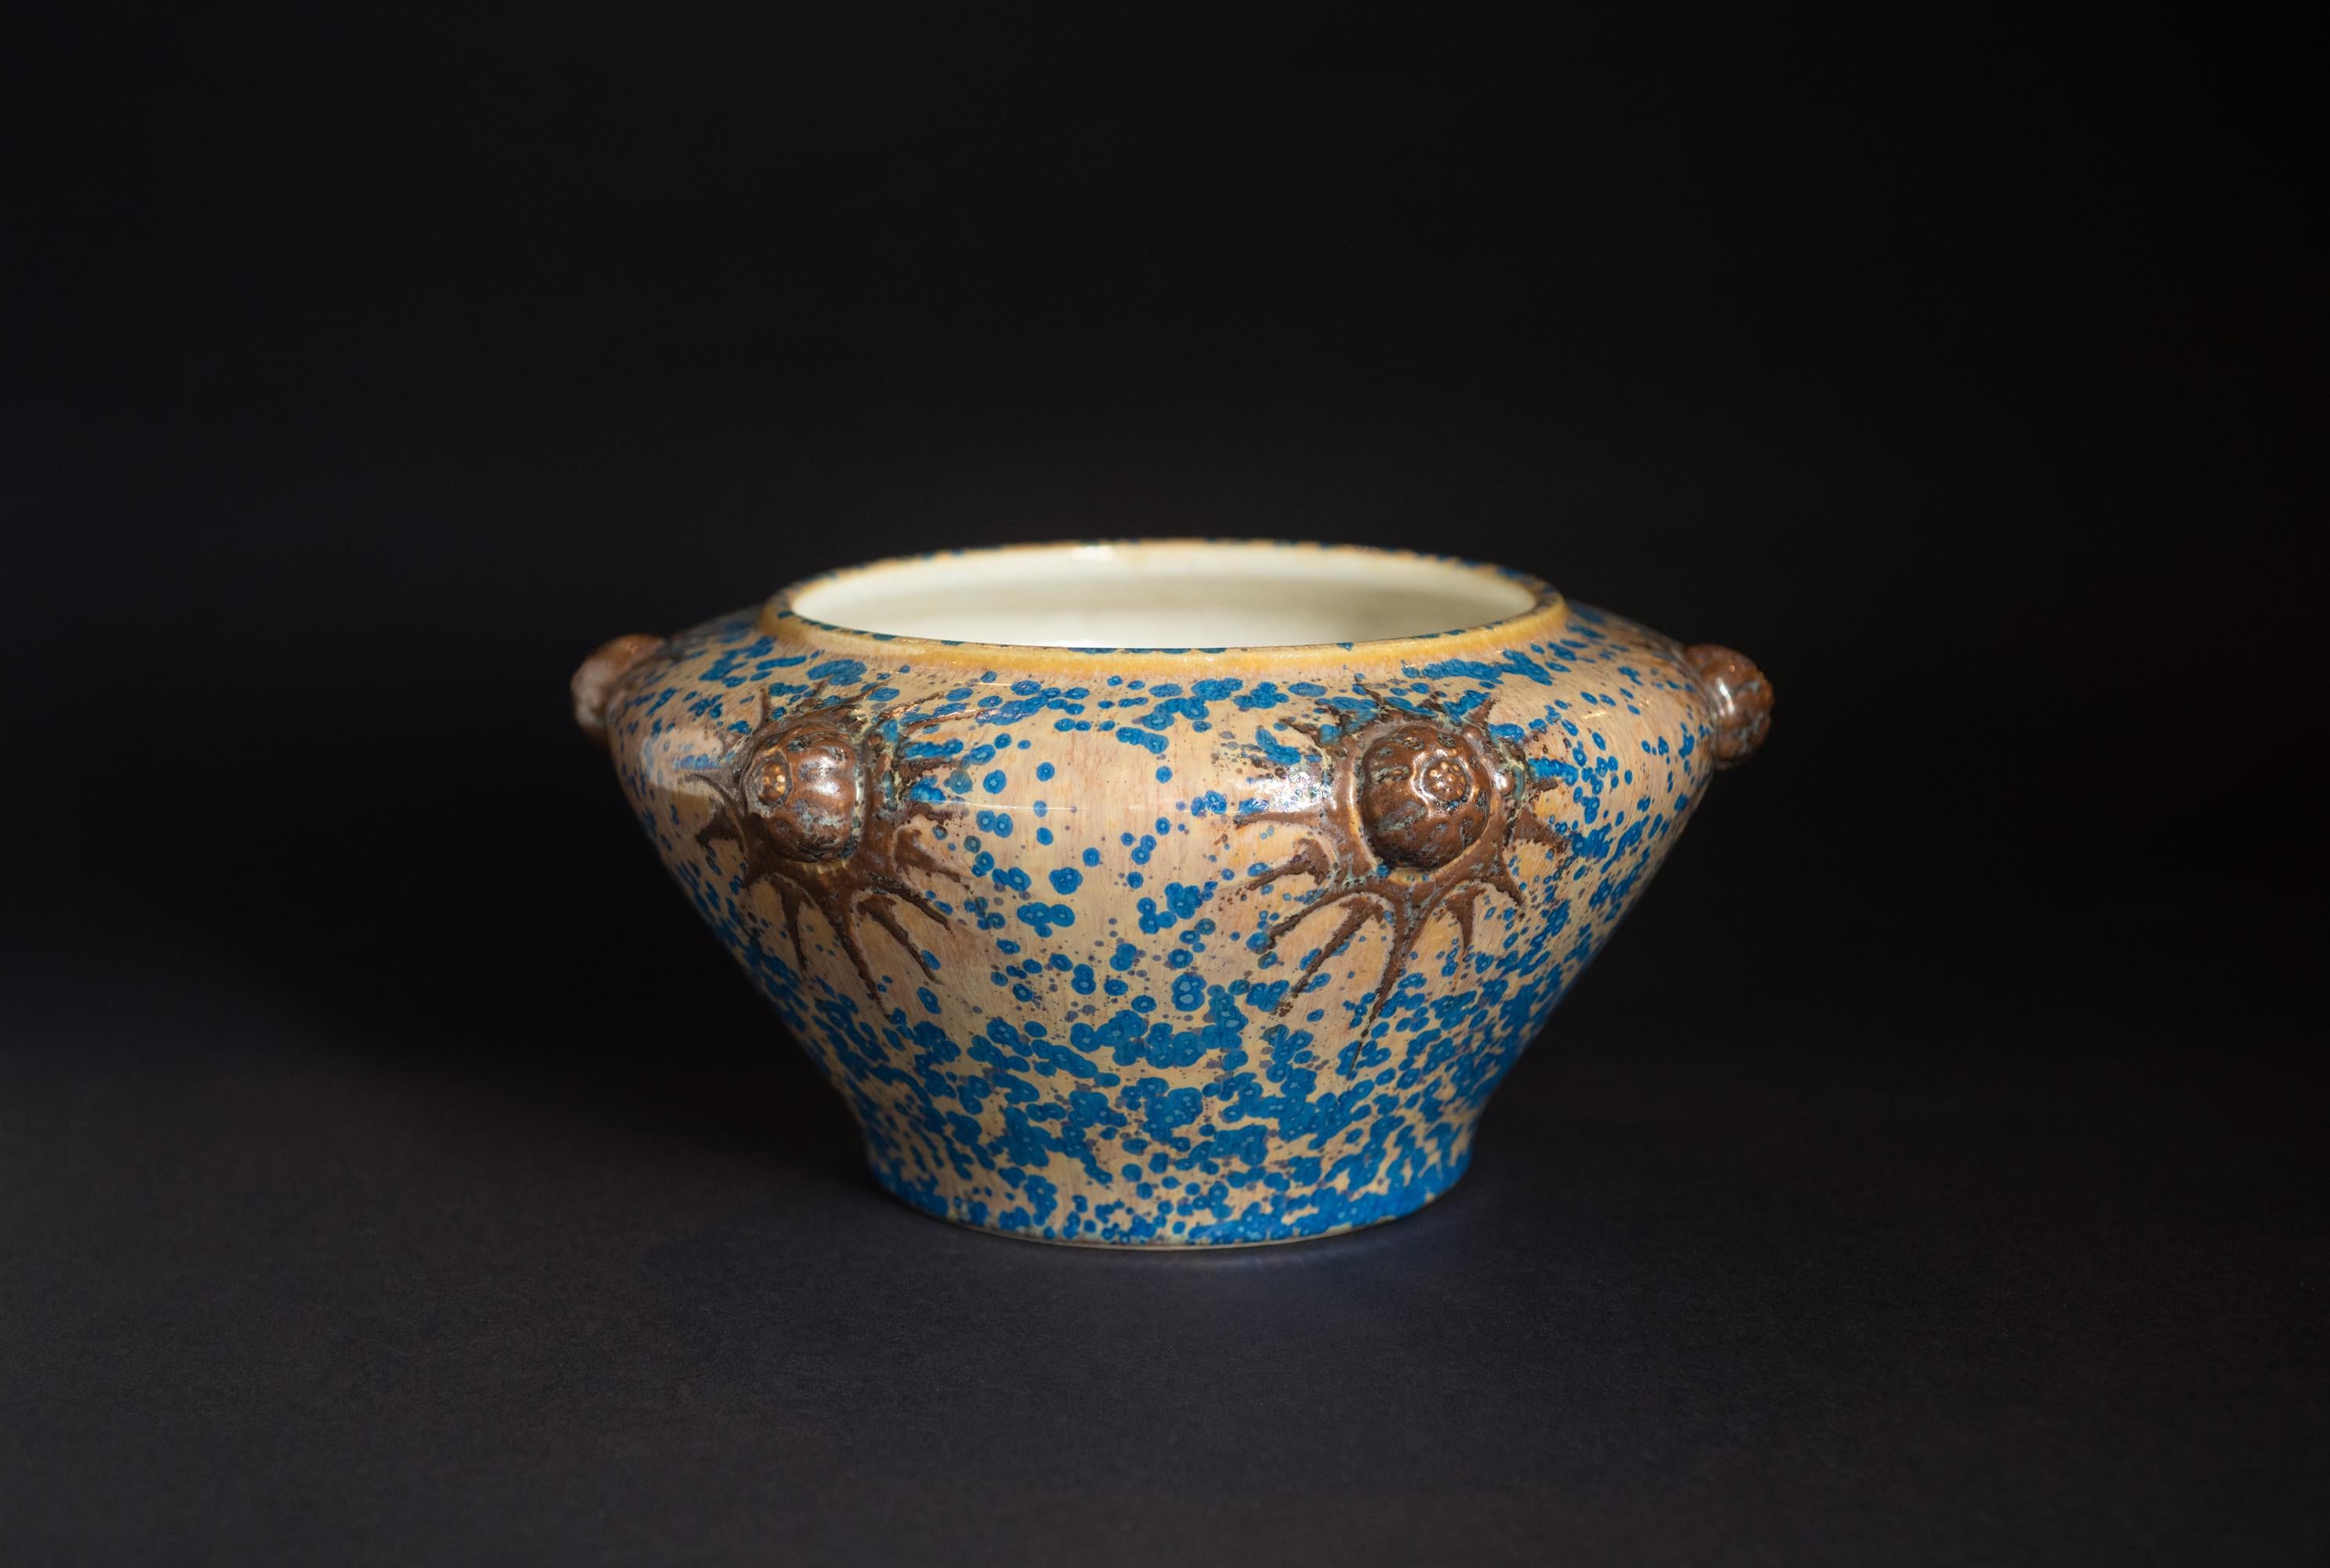 Striking bowl with crystalline iridized glaze.

Émile Diffloth (1856 – 1933) was a French ceramicist who was born in Couleuvre. He received his education at the École des Arts Décoratifs in Paris. In 1899, he became artistic director of Kéramis,